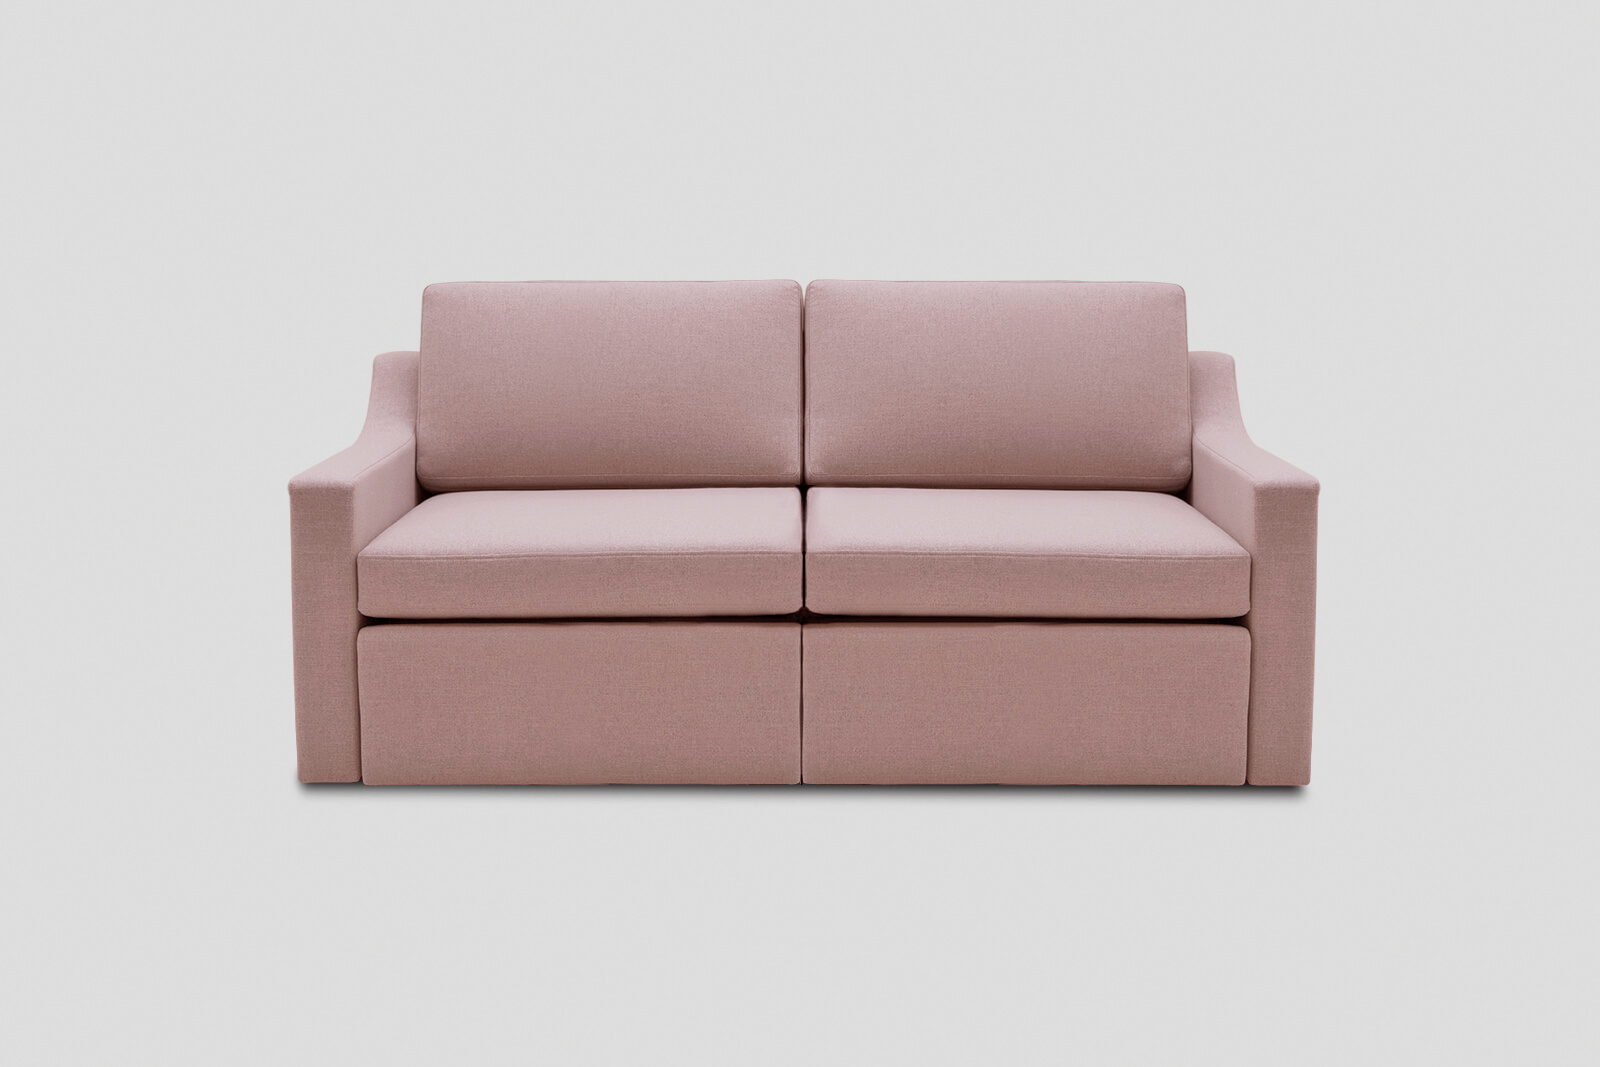 HBSB02-kingsize-sofa-bed-rosewater-front